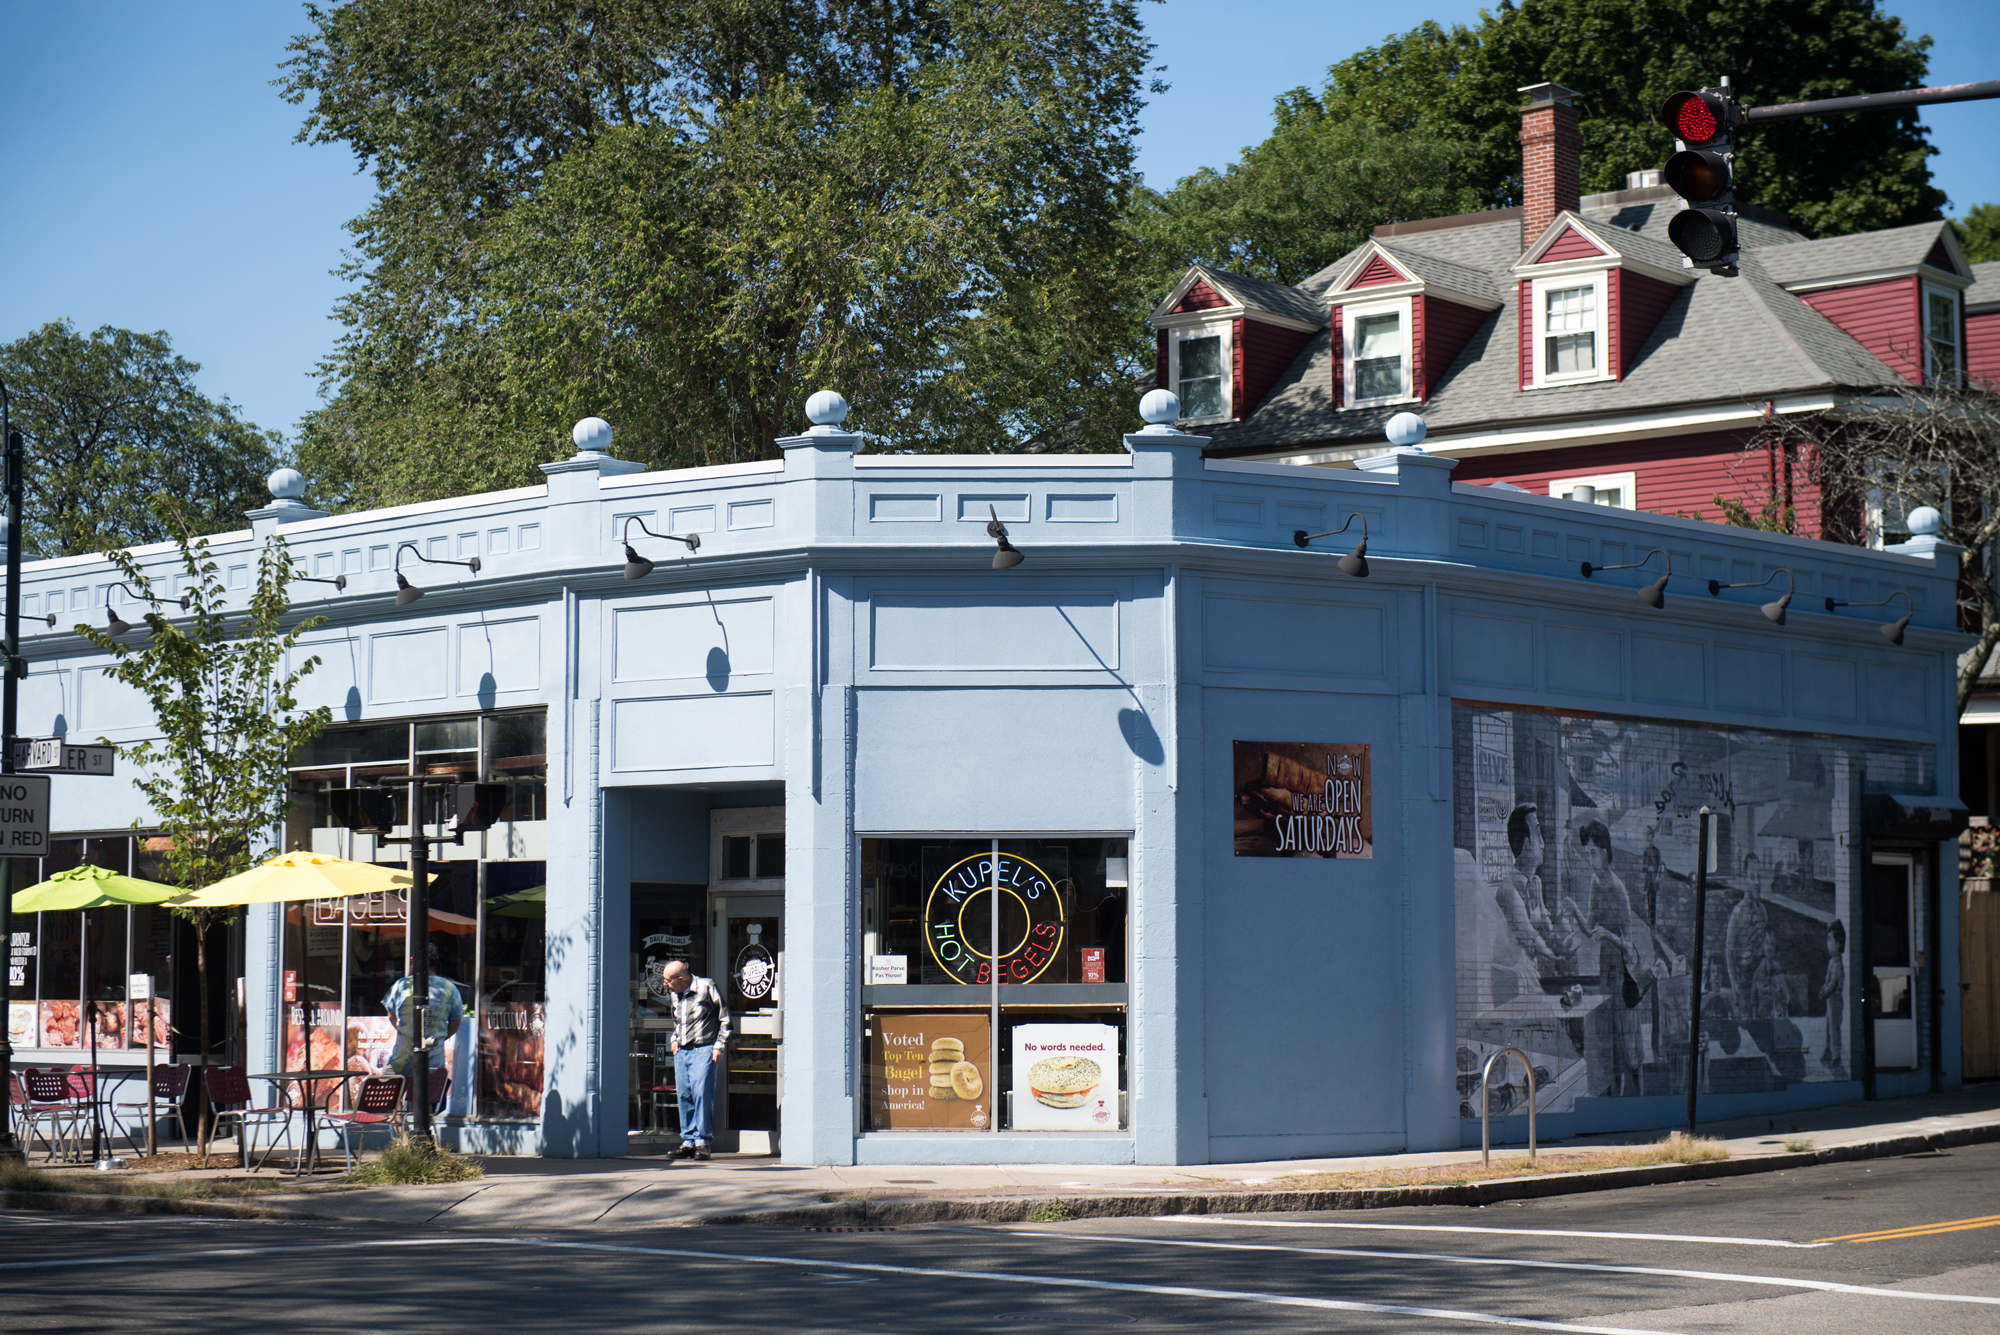 The blue-painted exterior of Kupel's Bakery